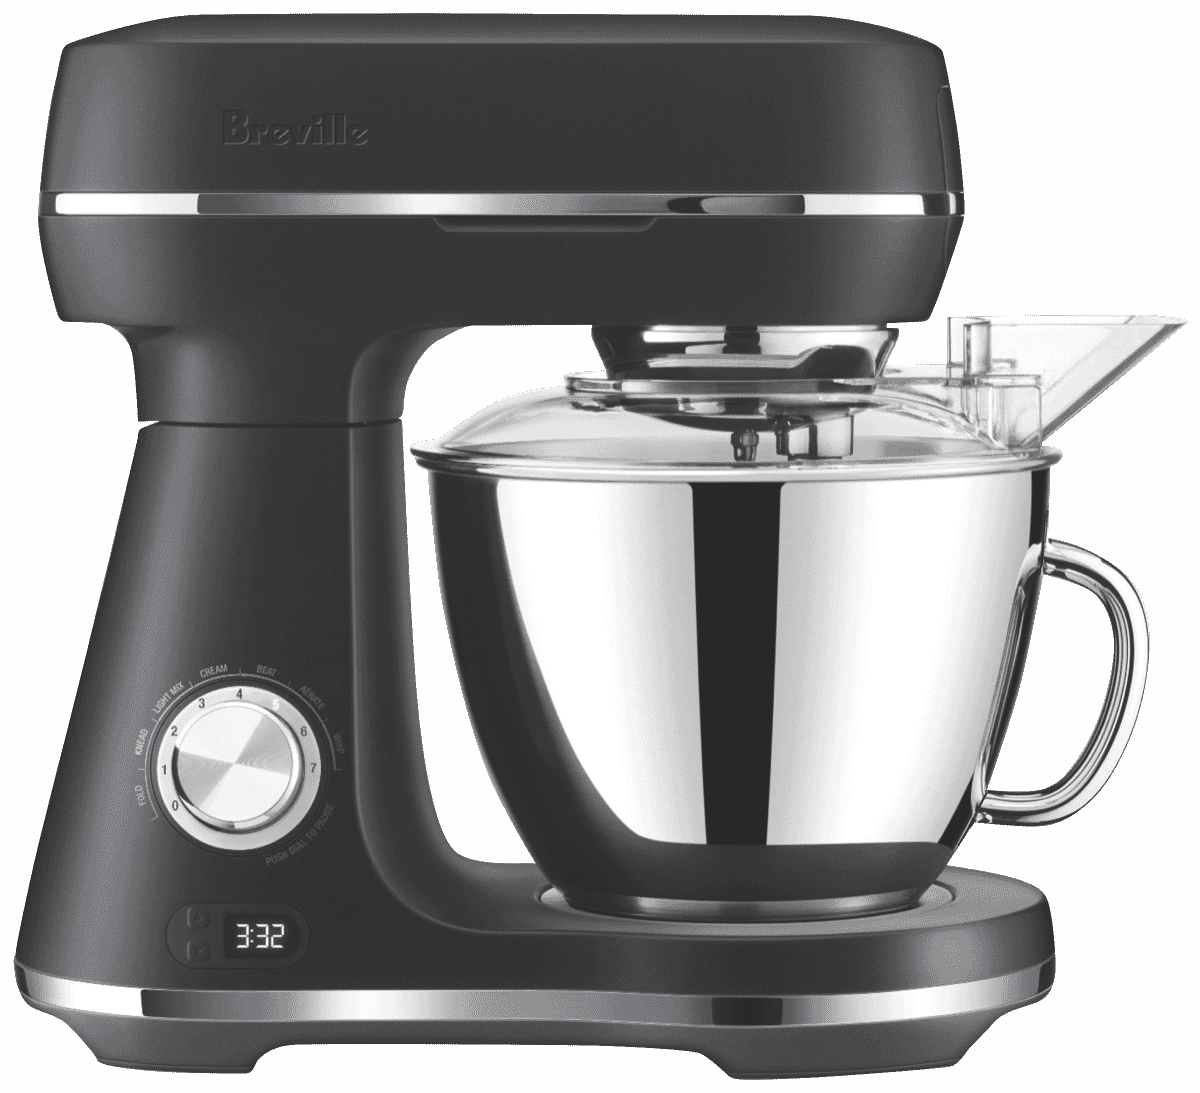 Breville LEM750BTR The Bakery Chef Hub Stand Mixer at The Good